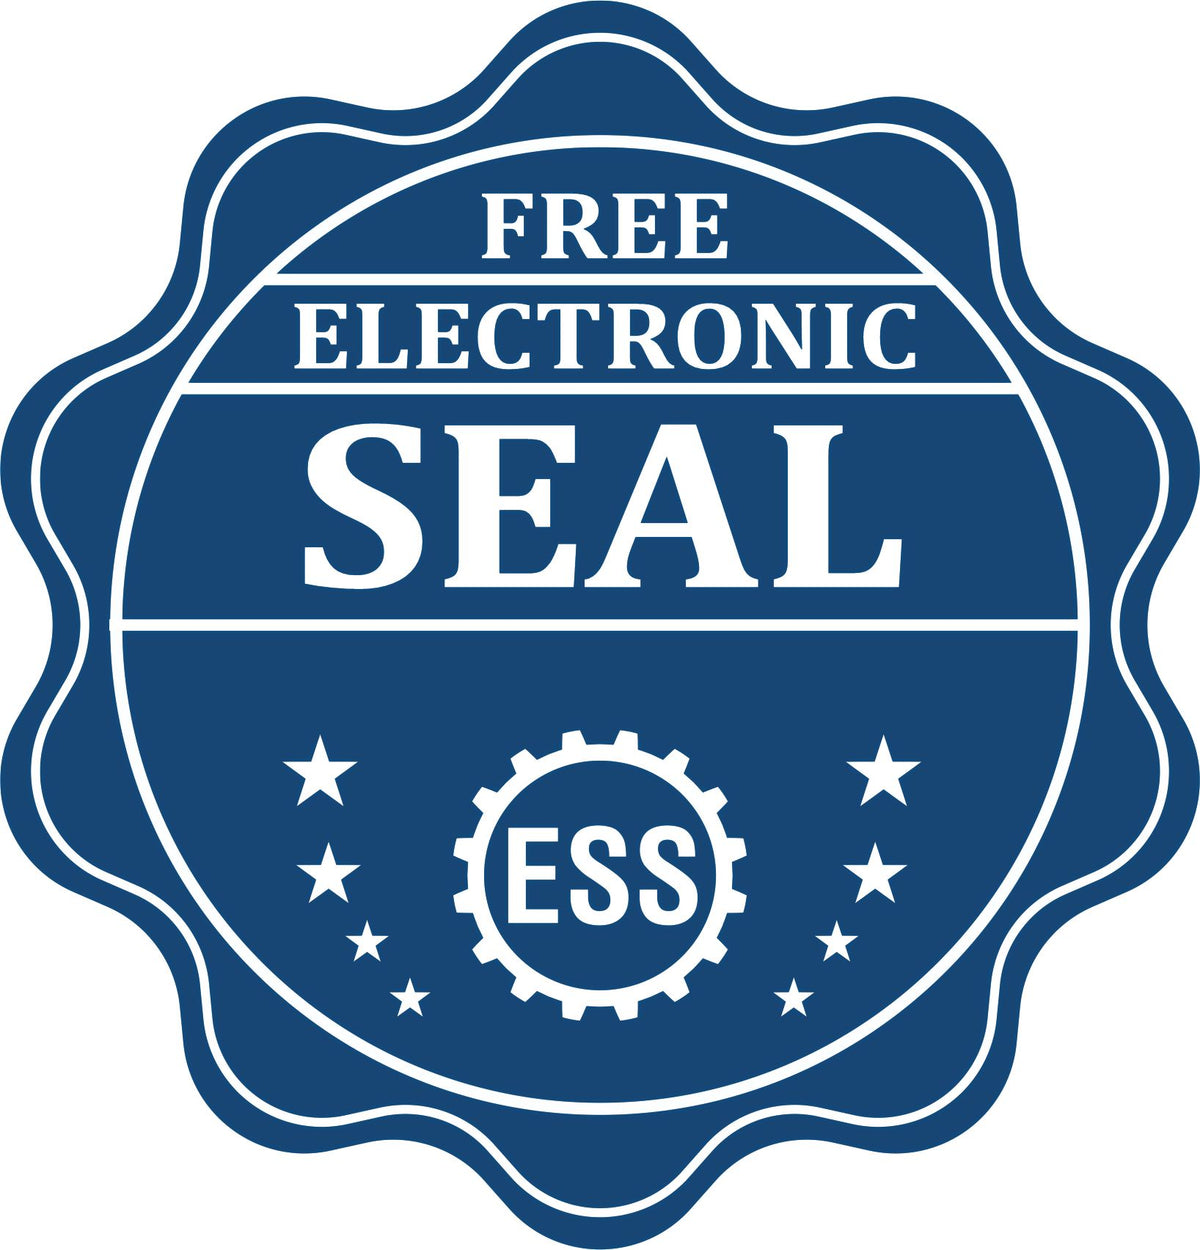 A badge showing a free electronic seal for the Soft New Hampshire Professional Engineer Seal with stars and the ESS gear on the emblem.